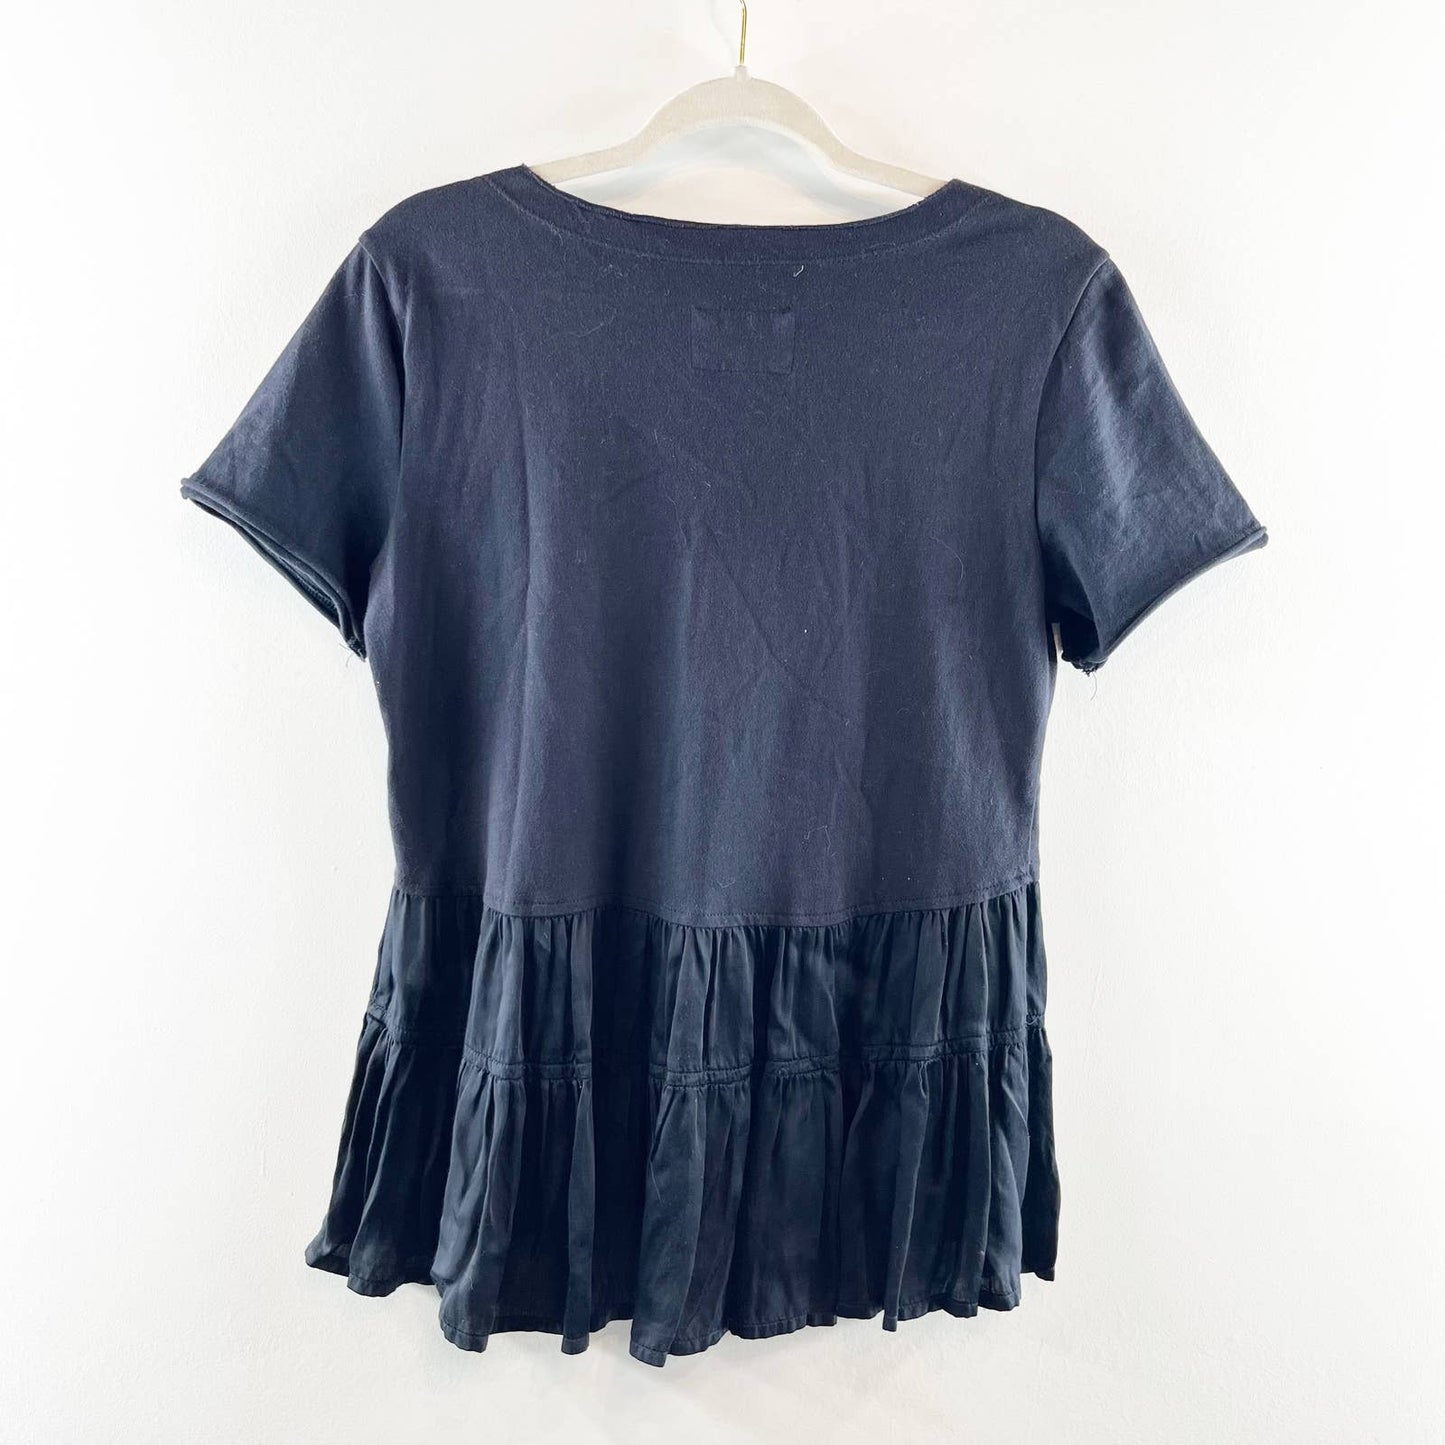 Anthropologie Maeve Black V-neck Louisa Tiered Peasant Babydoll Tee Shirt Top XS